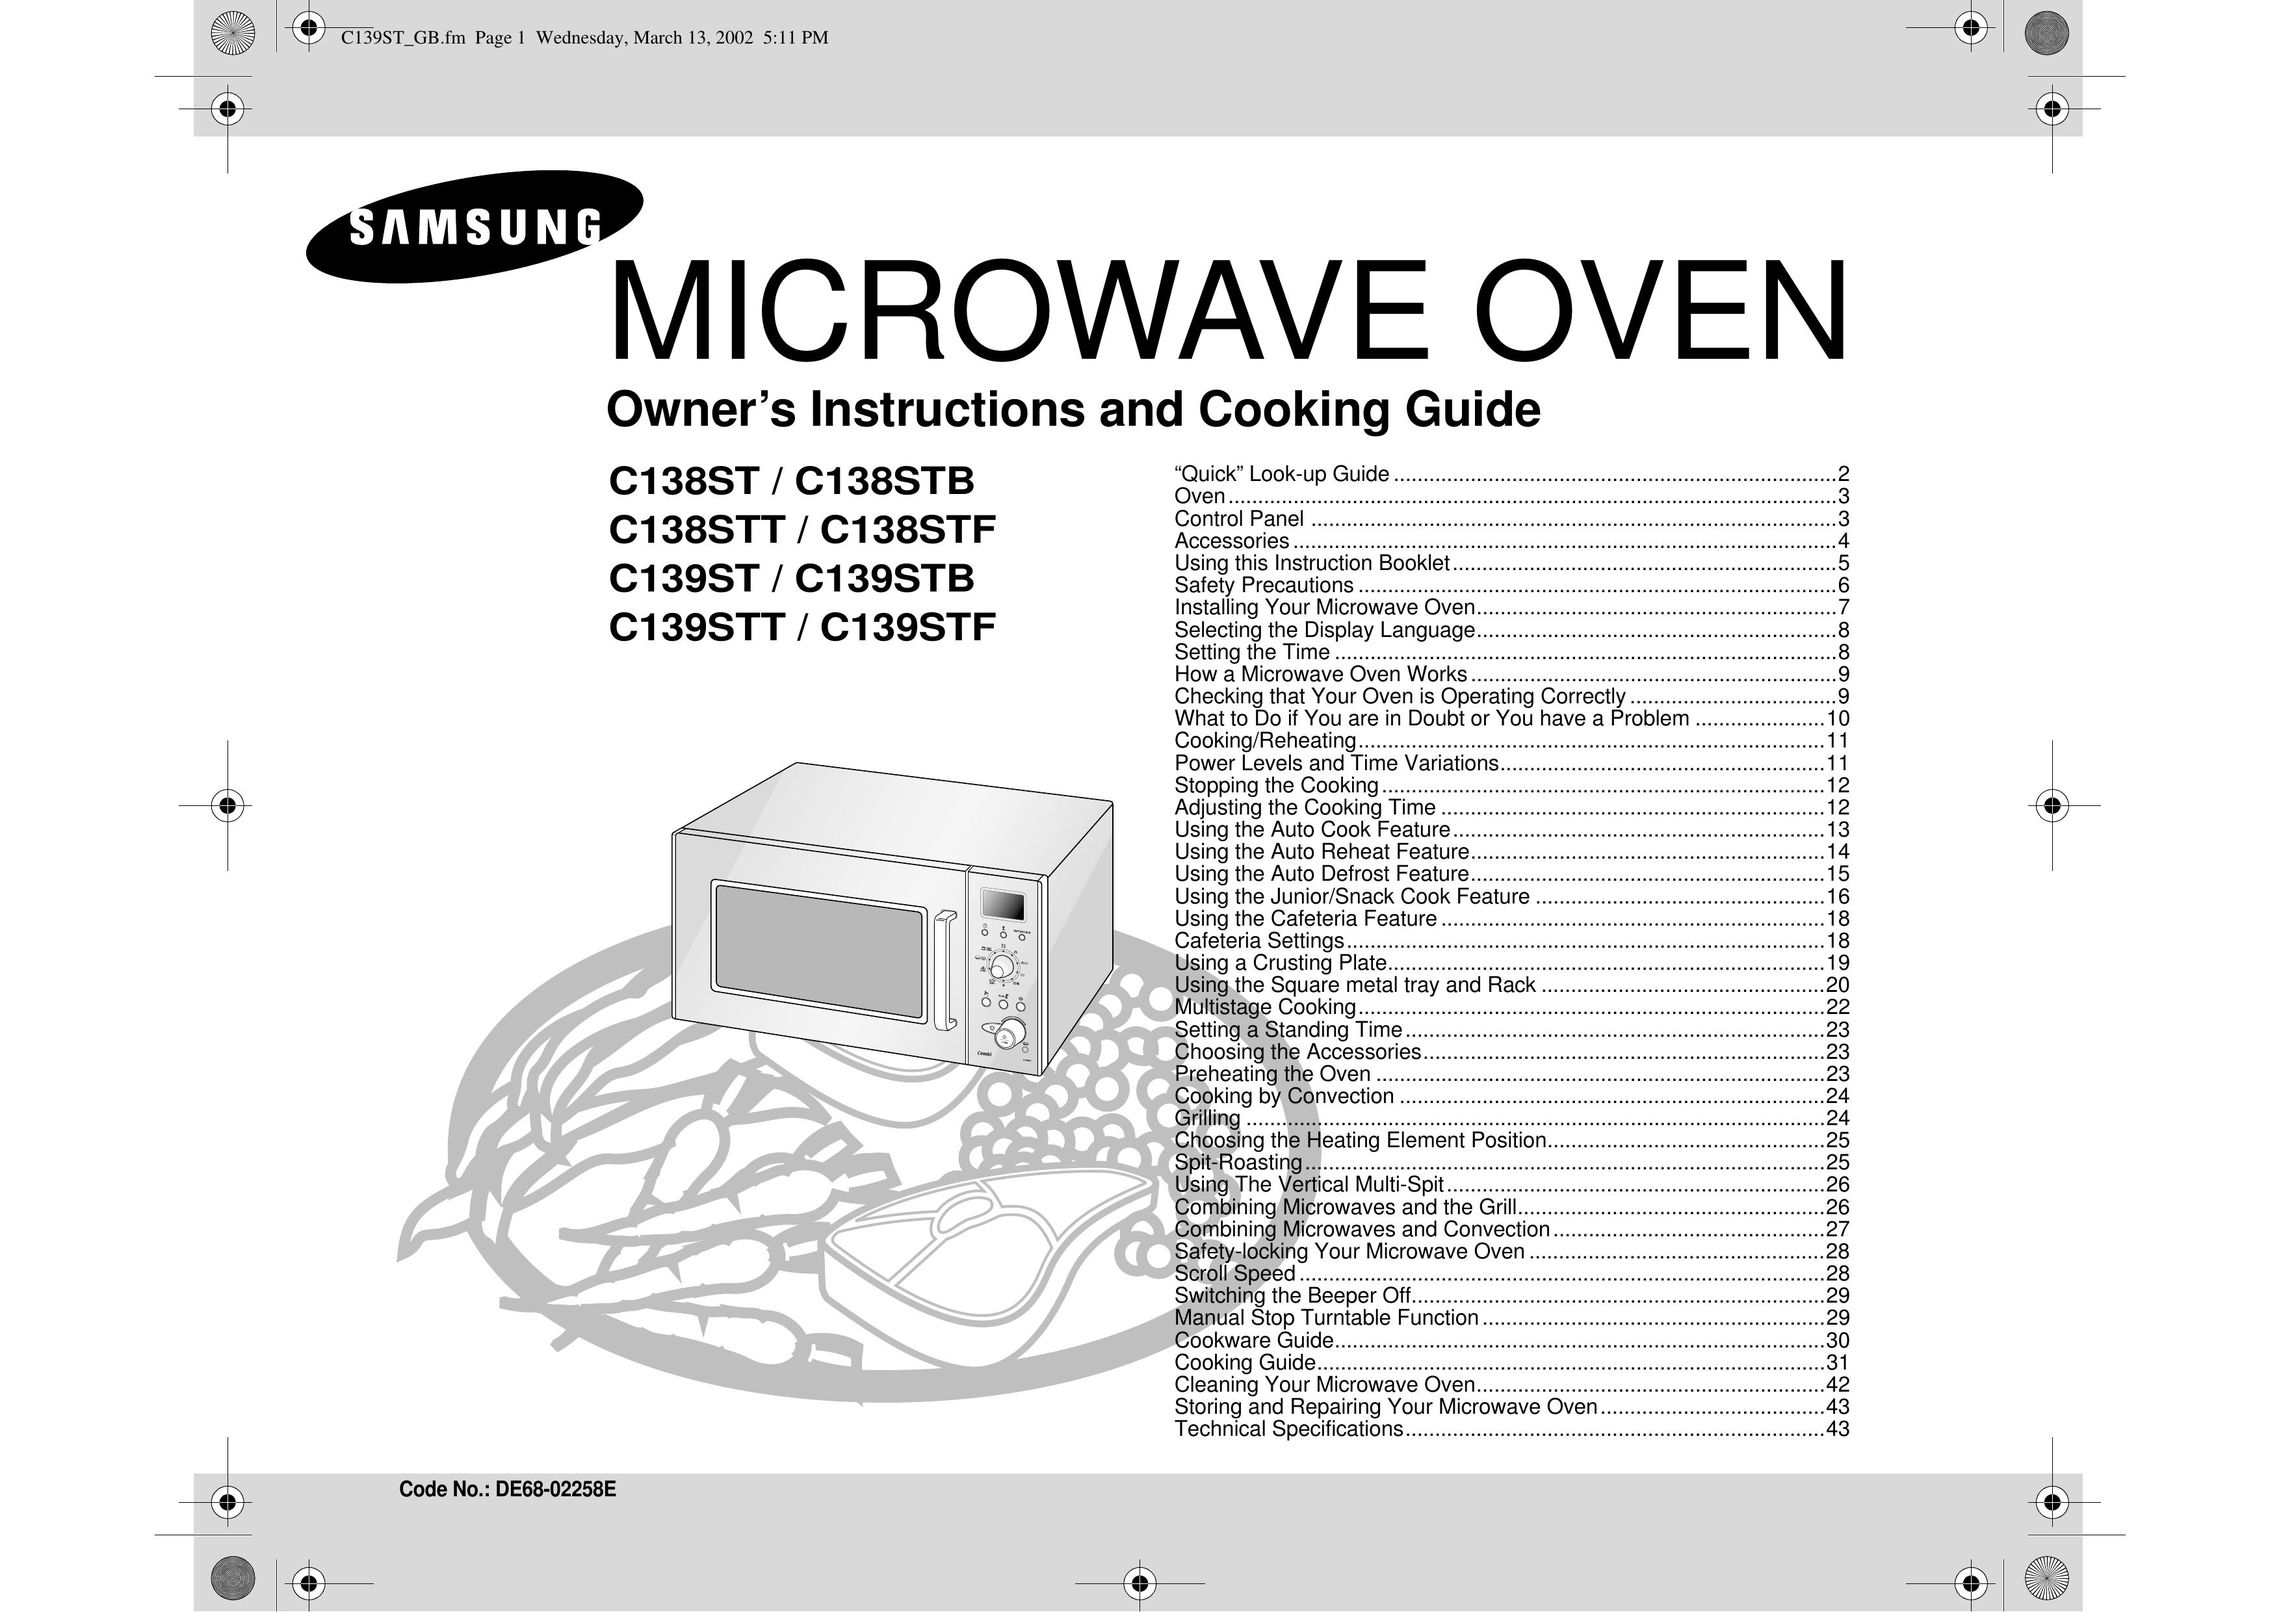 Samsung C138ST Microwave Oven User Manual